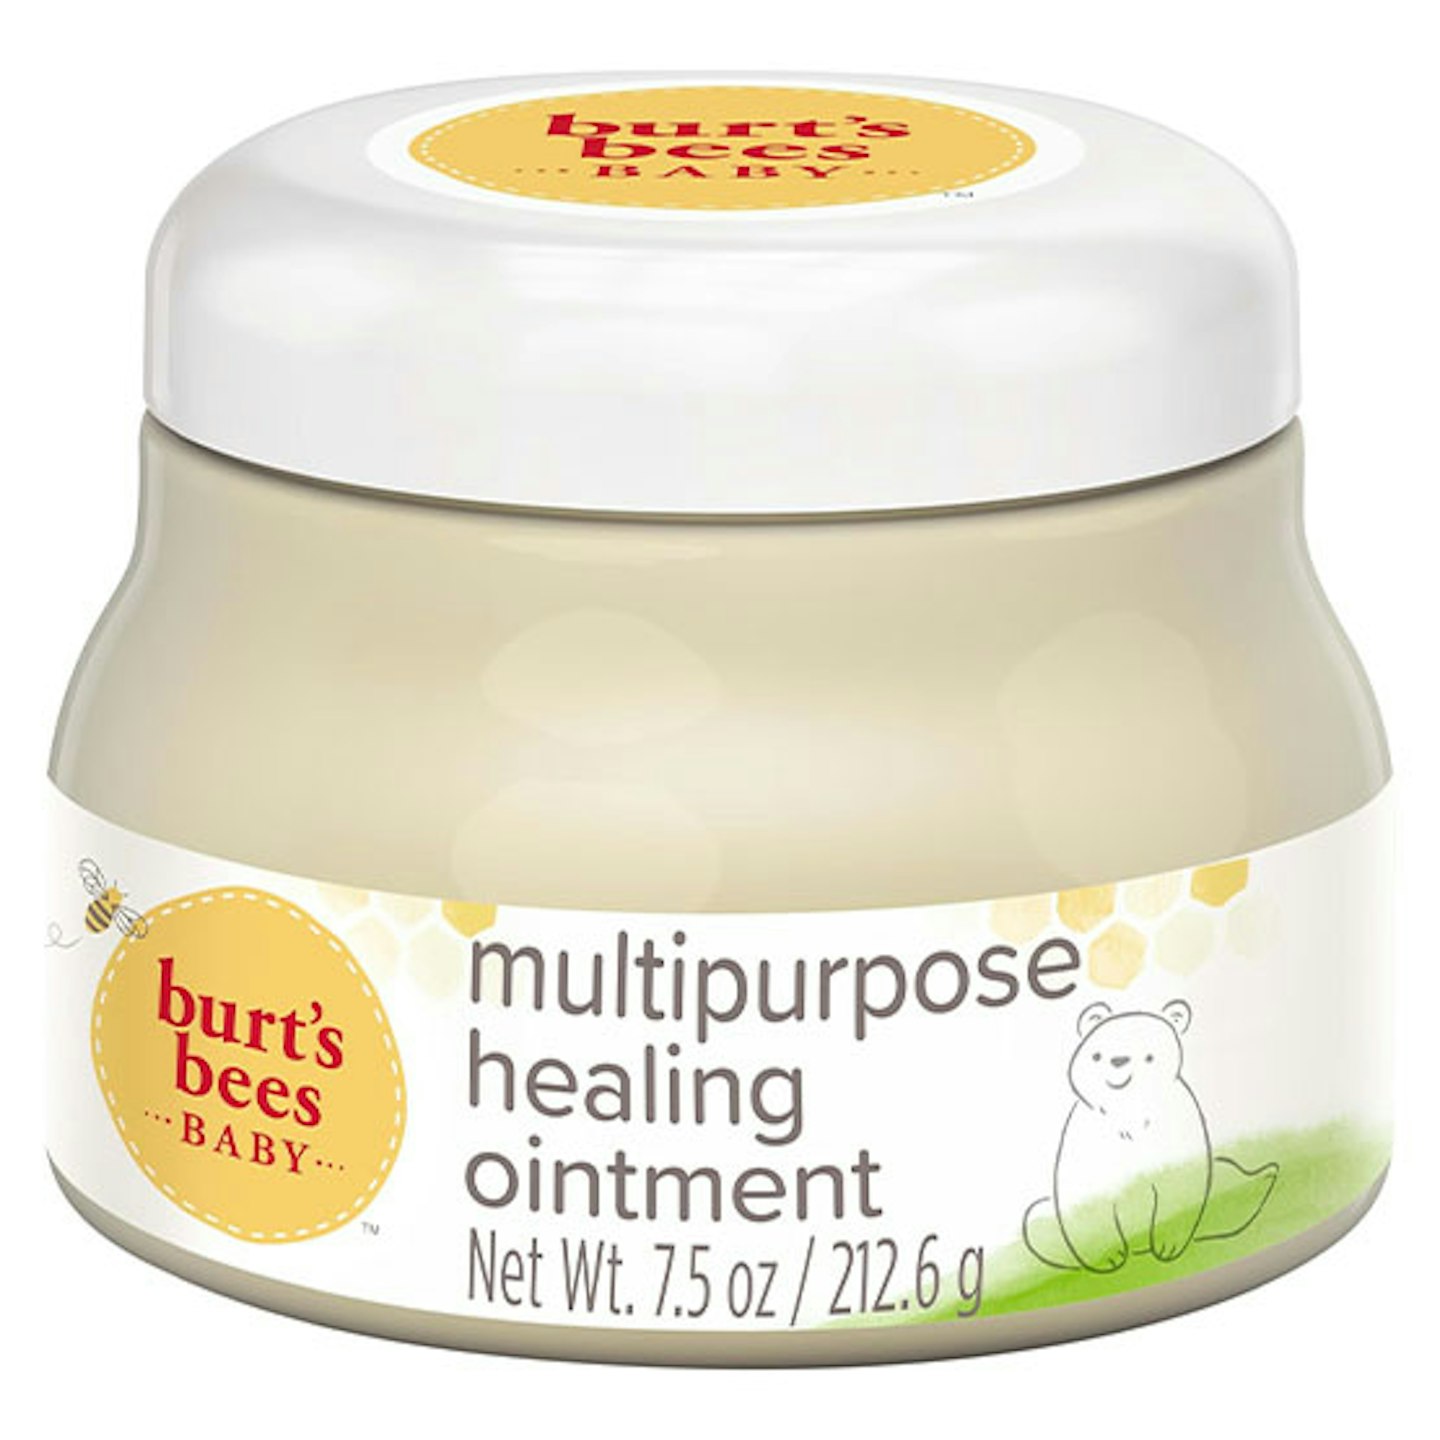 Burts bees ointment